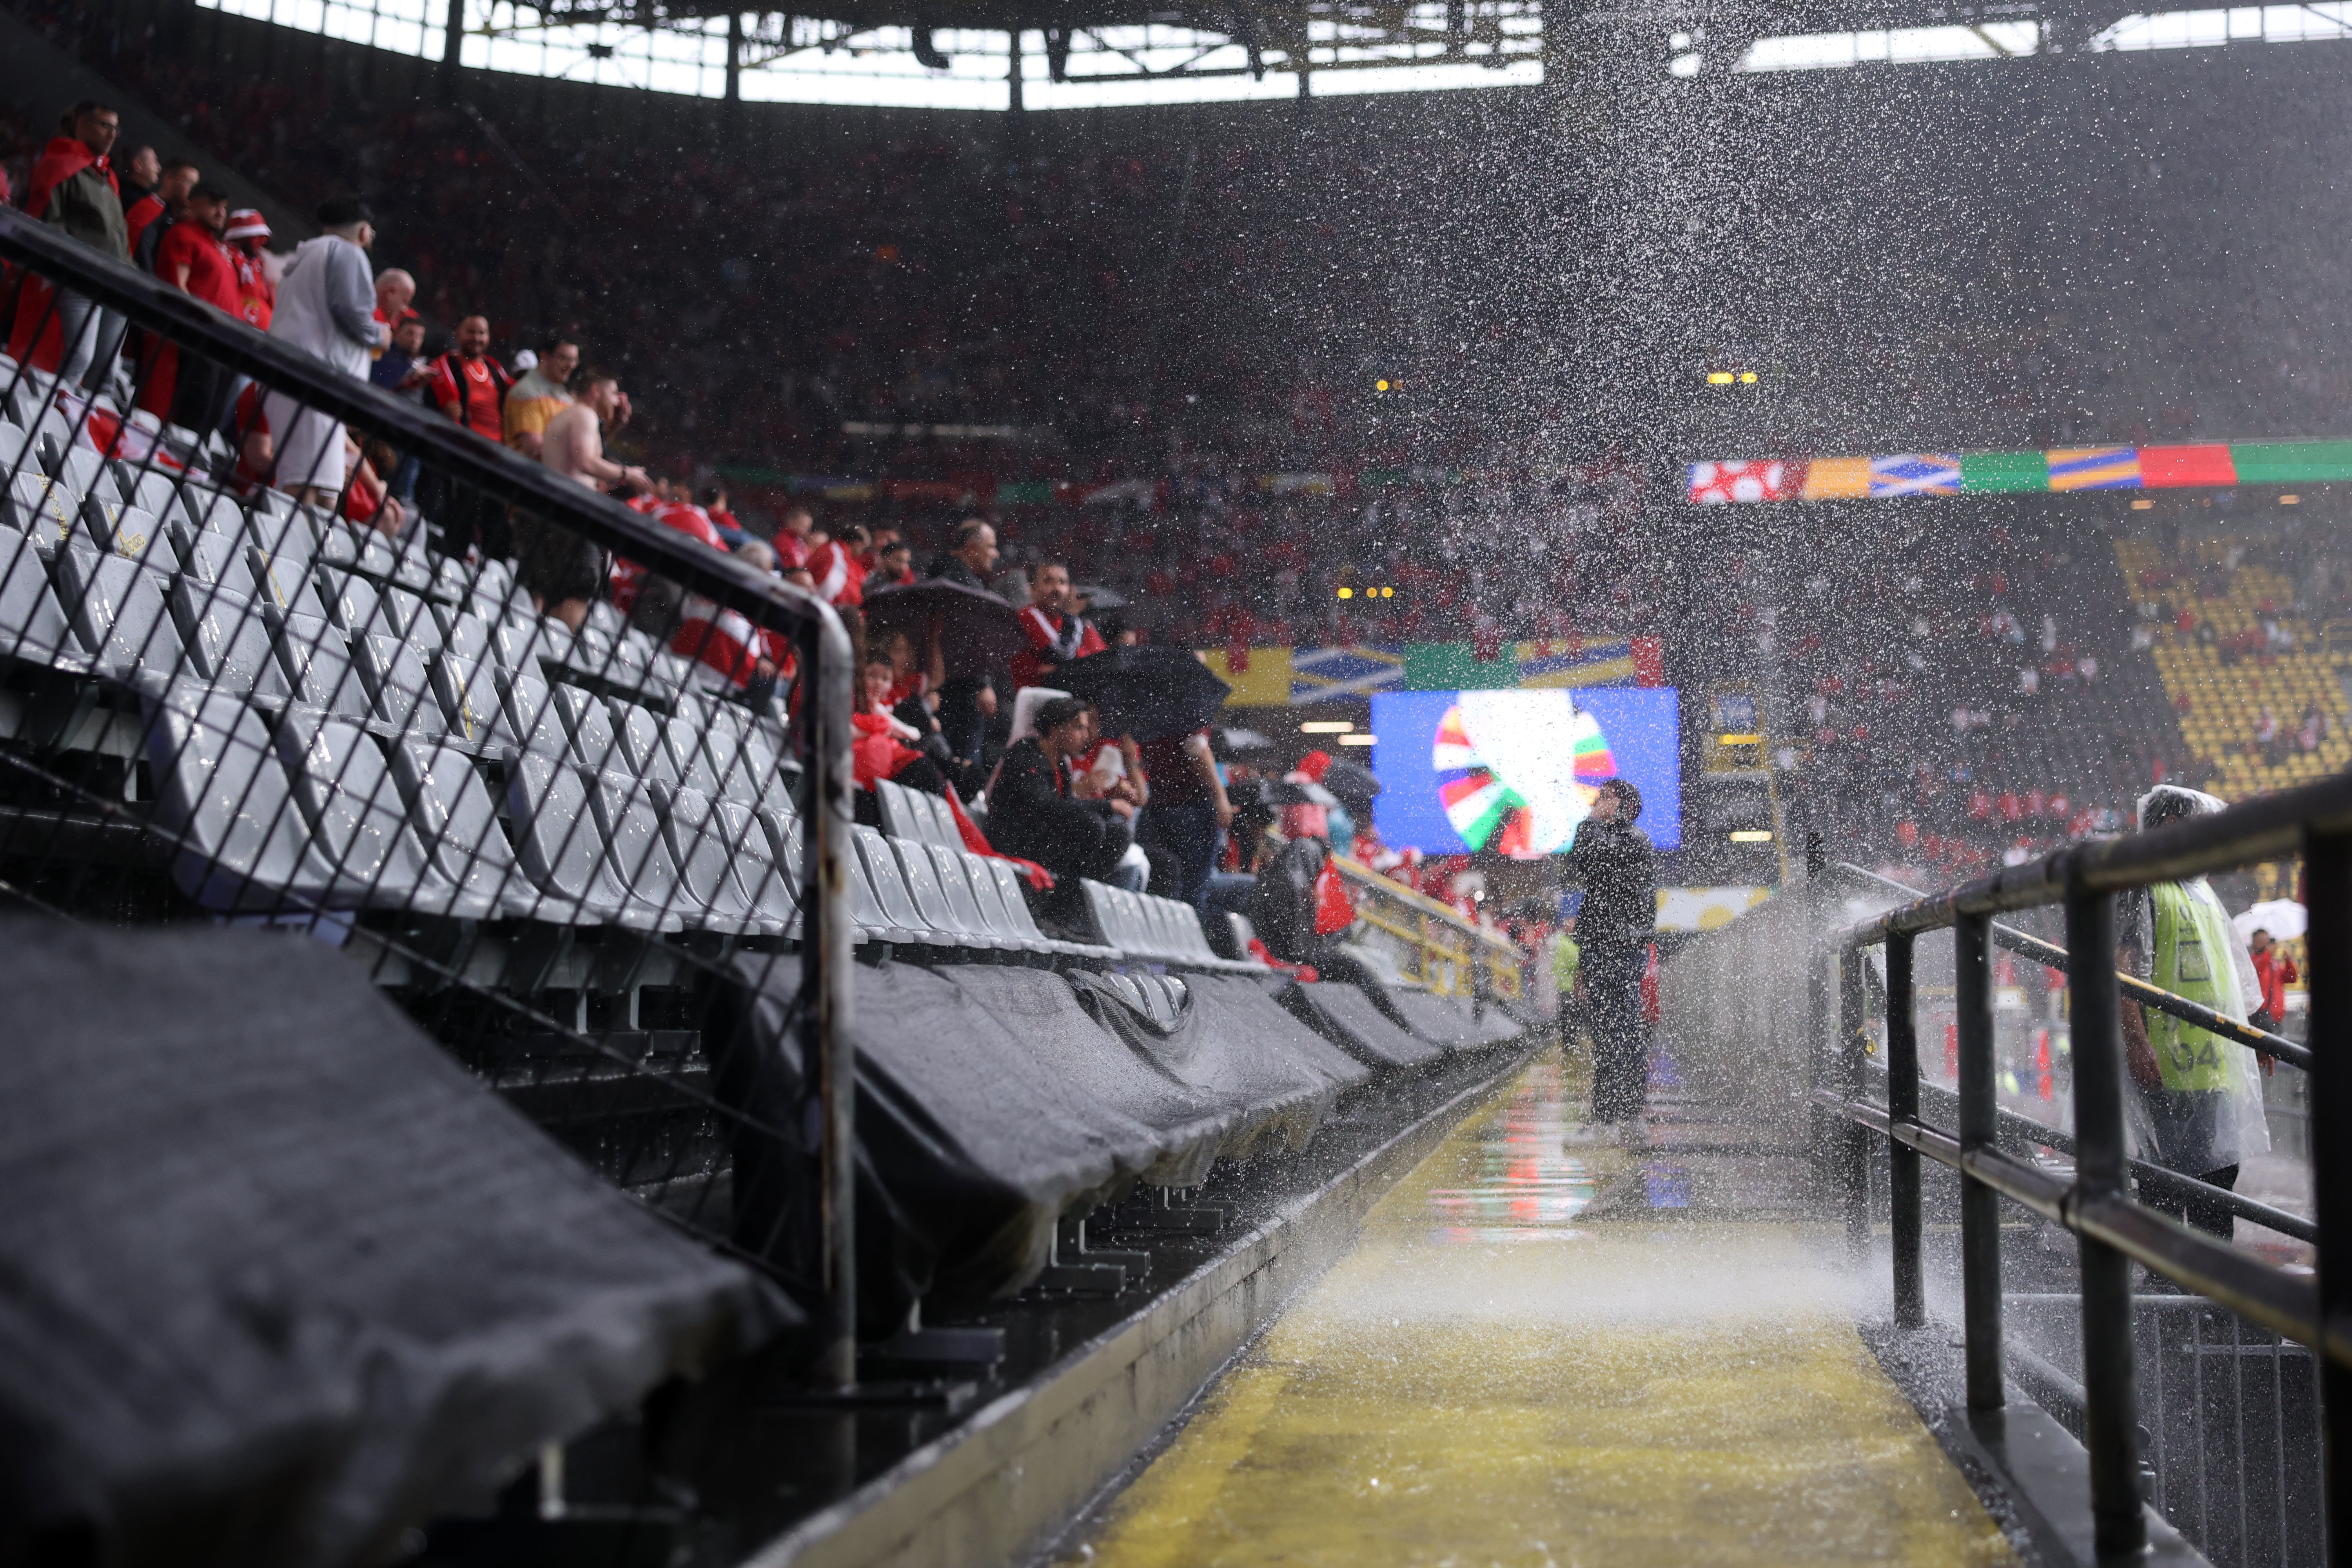 Storms in Dortmund caused rain to pour through the roof of the BVB Stadion